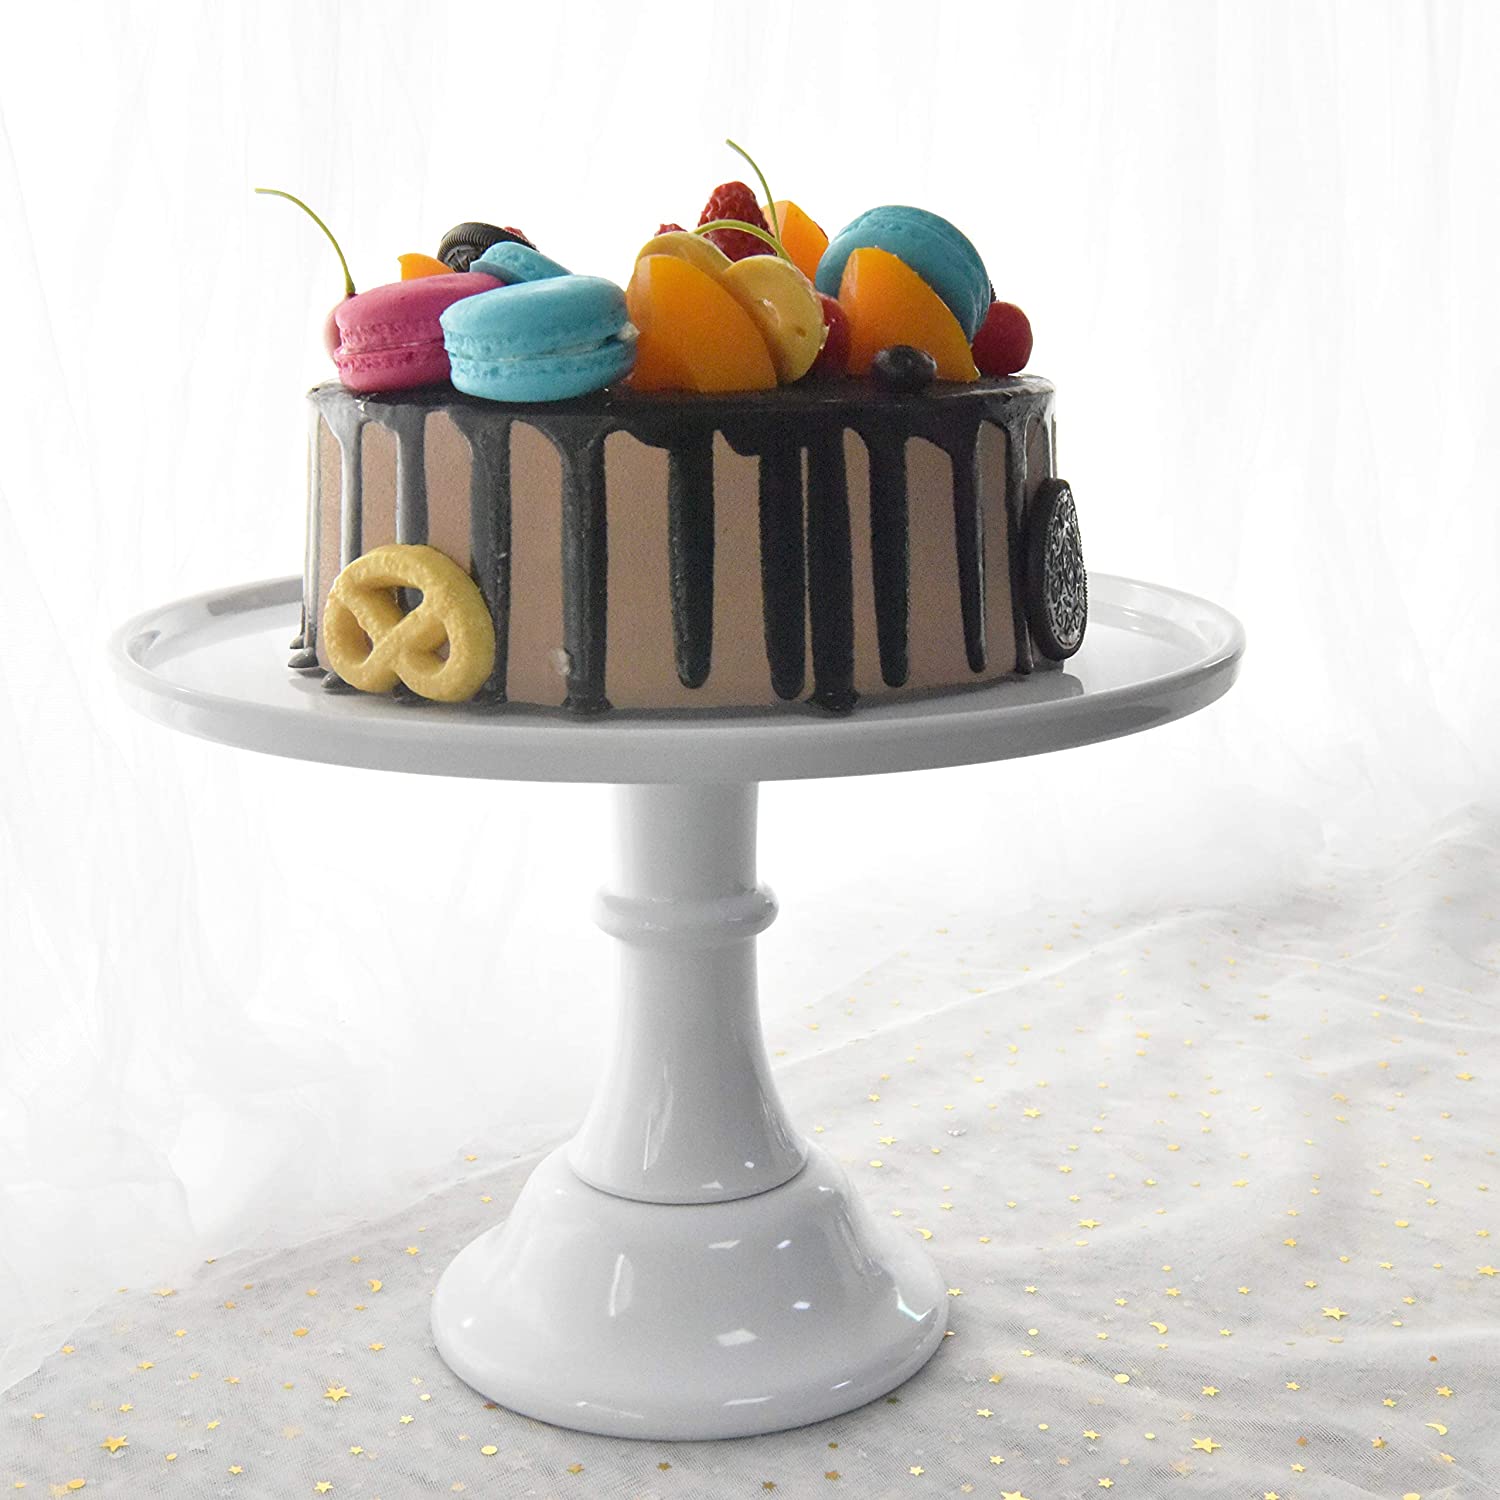 Ideal for all types of baked treats including cakes Rustic wood design. cup-cakes 12 Inch Diameter Wooden Cake Stand on Pedestal pastries multi-tier cakes bundt cakes birthday cake